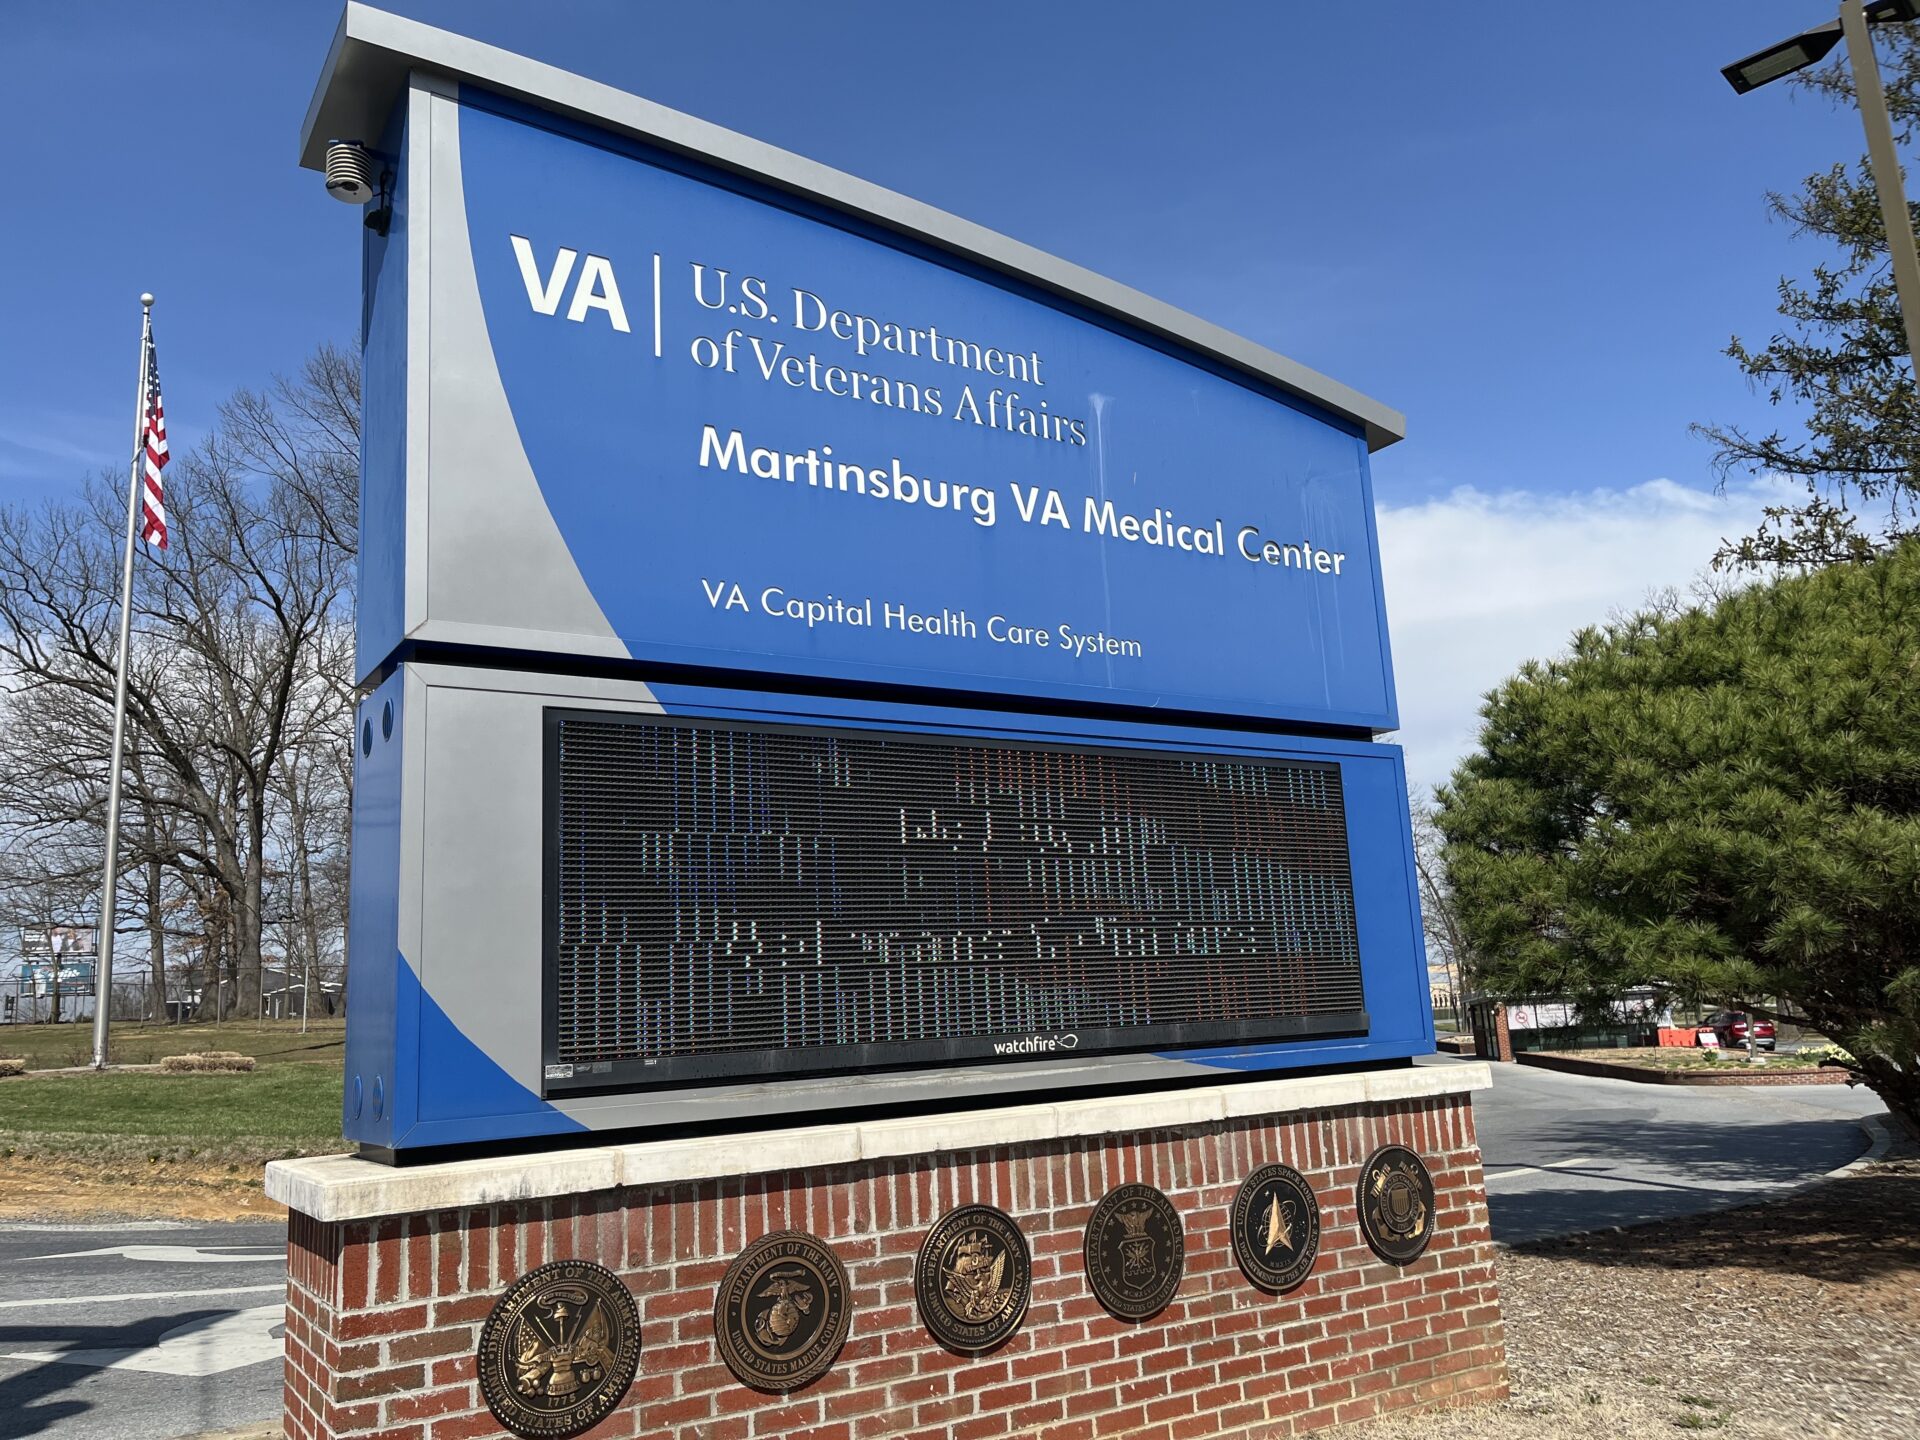 Martinsburg Physicians Develop New Approaches To Rural Veteran Health Needs